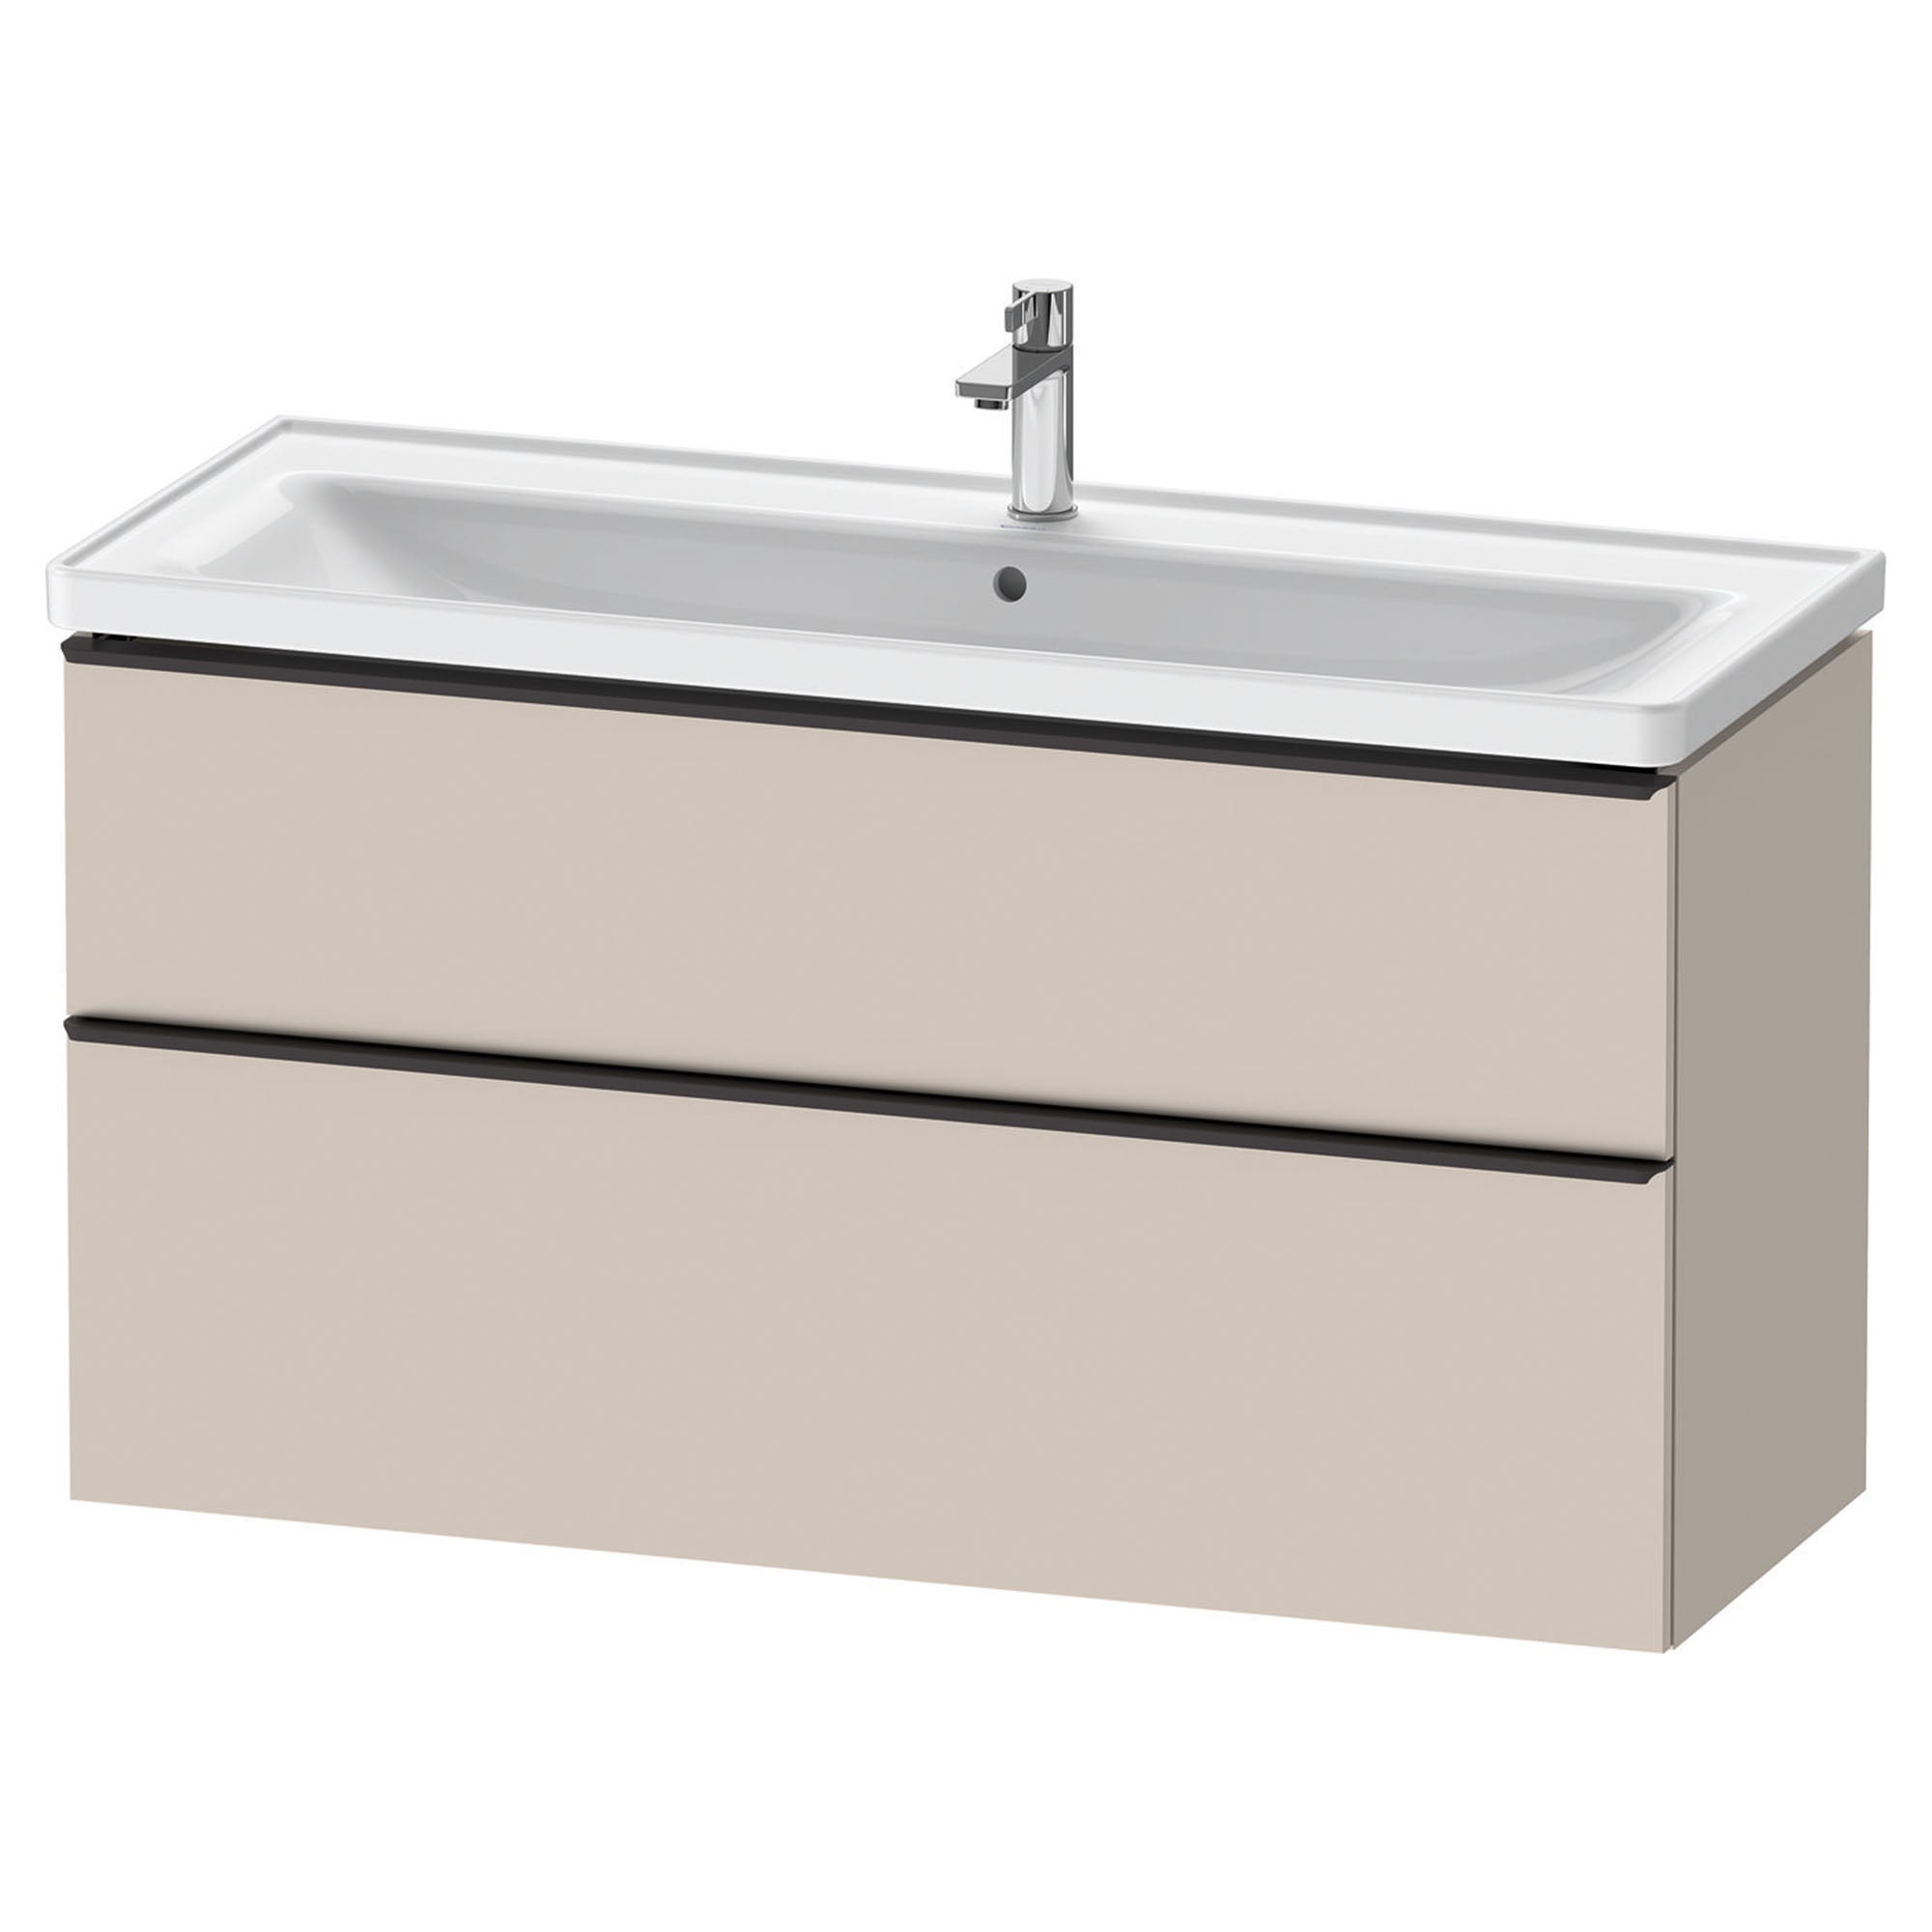 duravit d-neo 1200mm wall mounted vanity unit with d-neo basin taupe diamond black handles